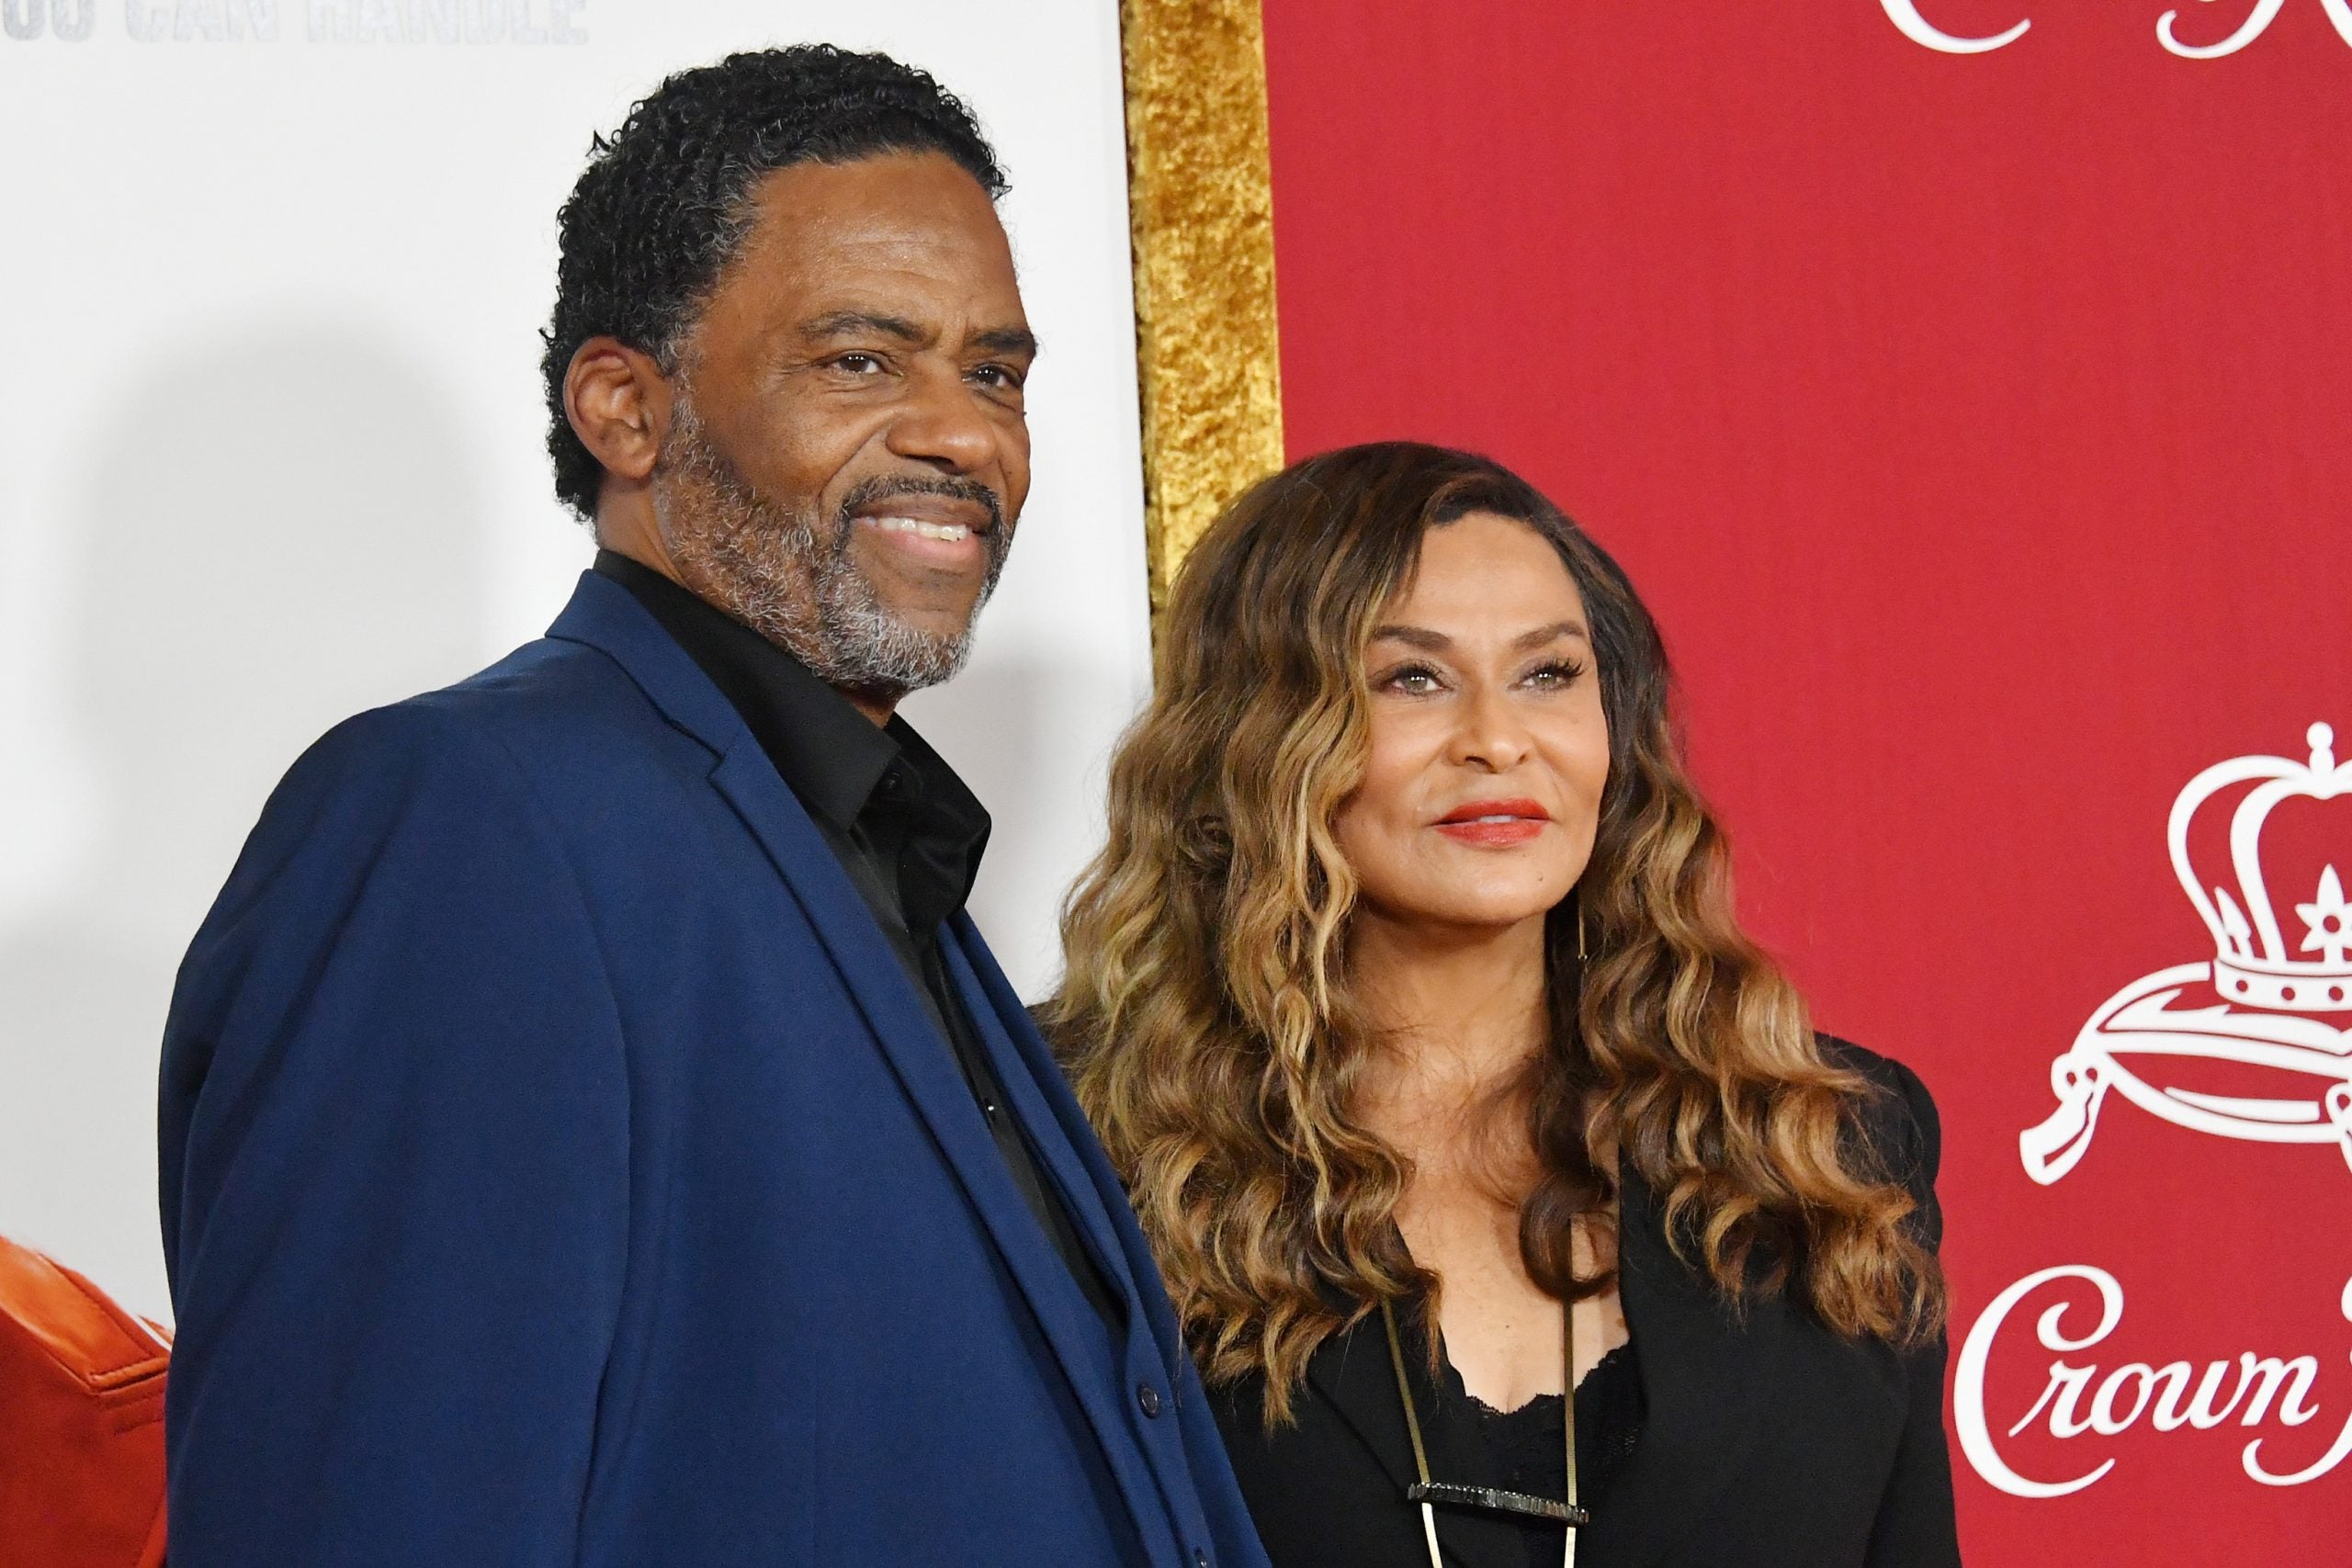 Tina Knowles And Richard Lawson To Divorce After 8 Years Of Marriage: A Timeline Of Their Relationship